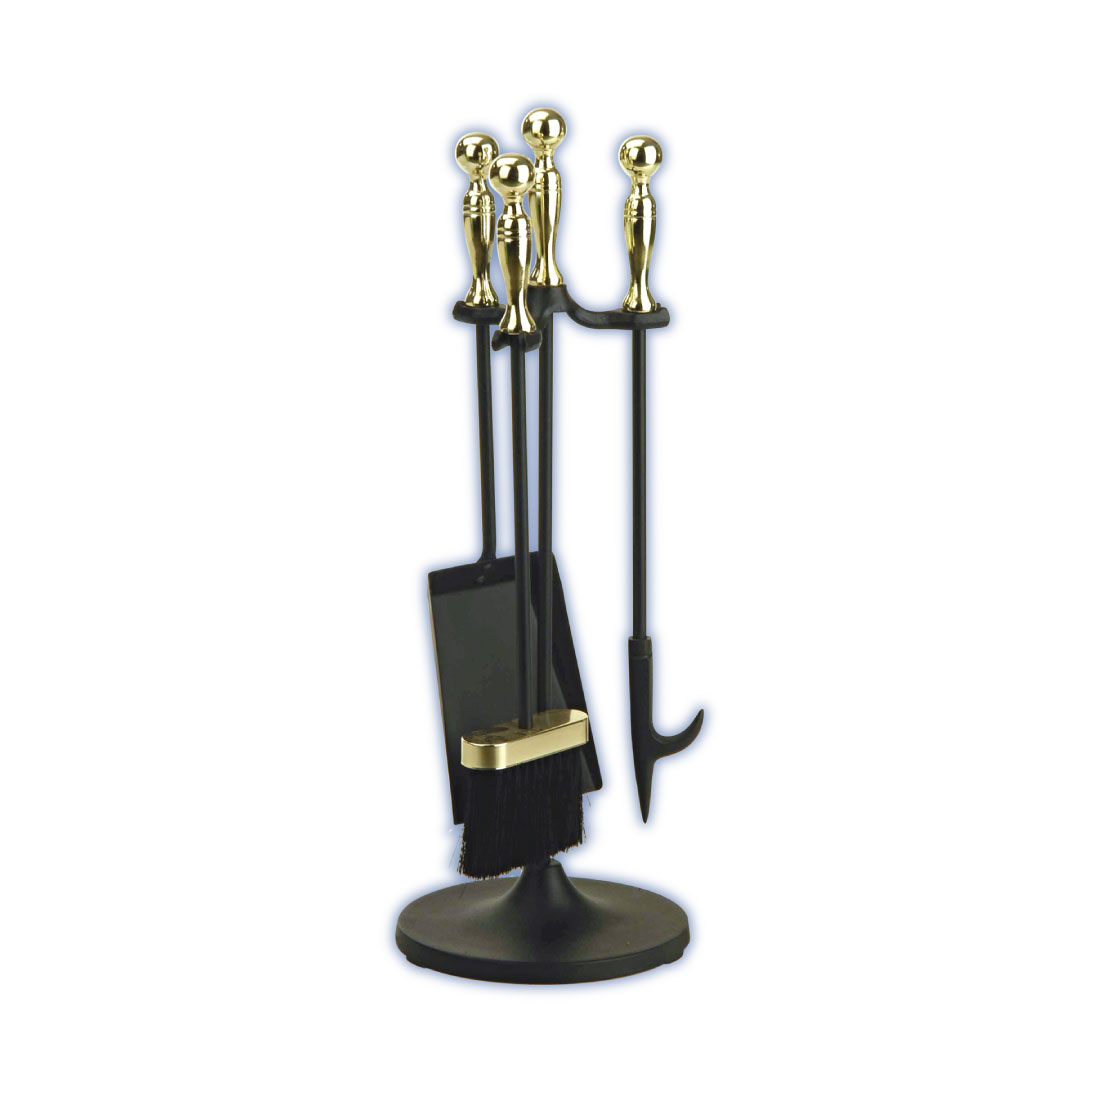 Melton black and gold fire tool set